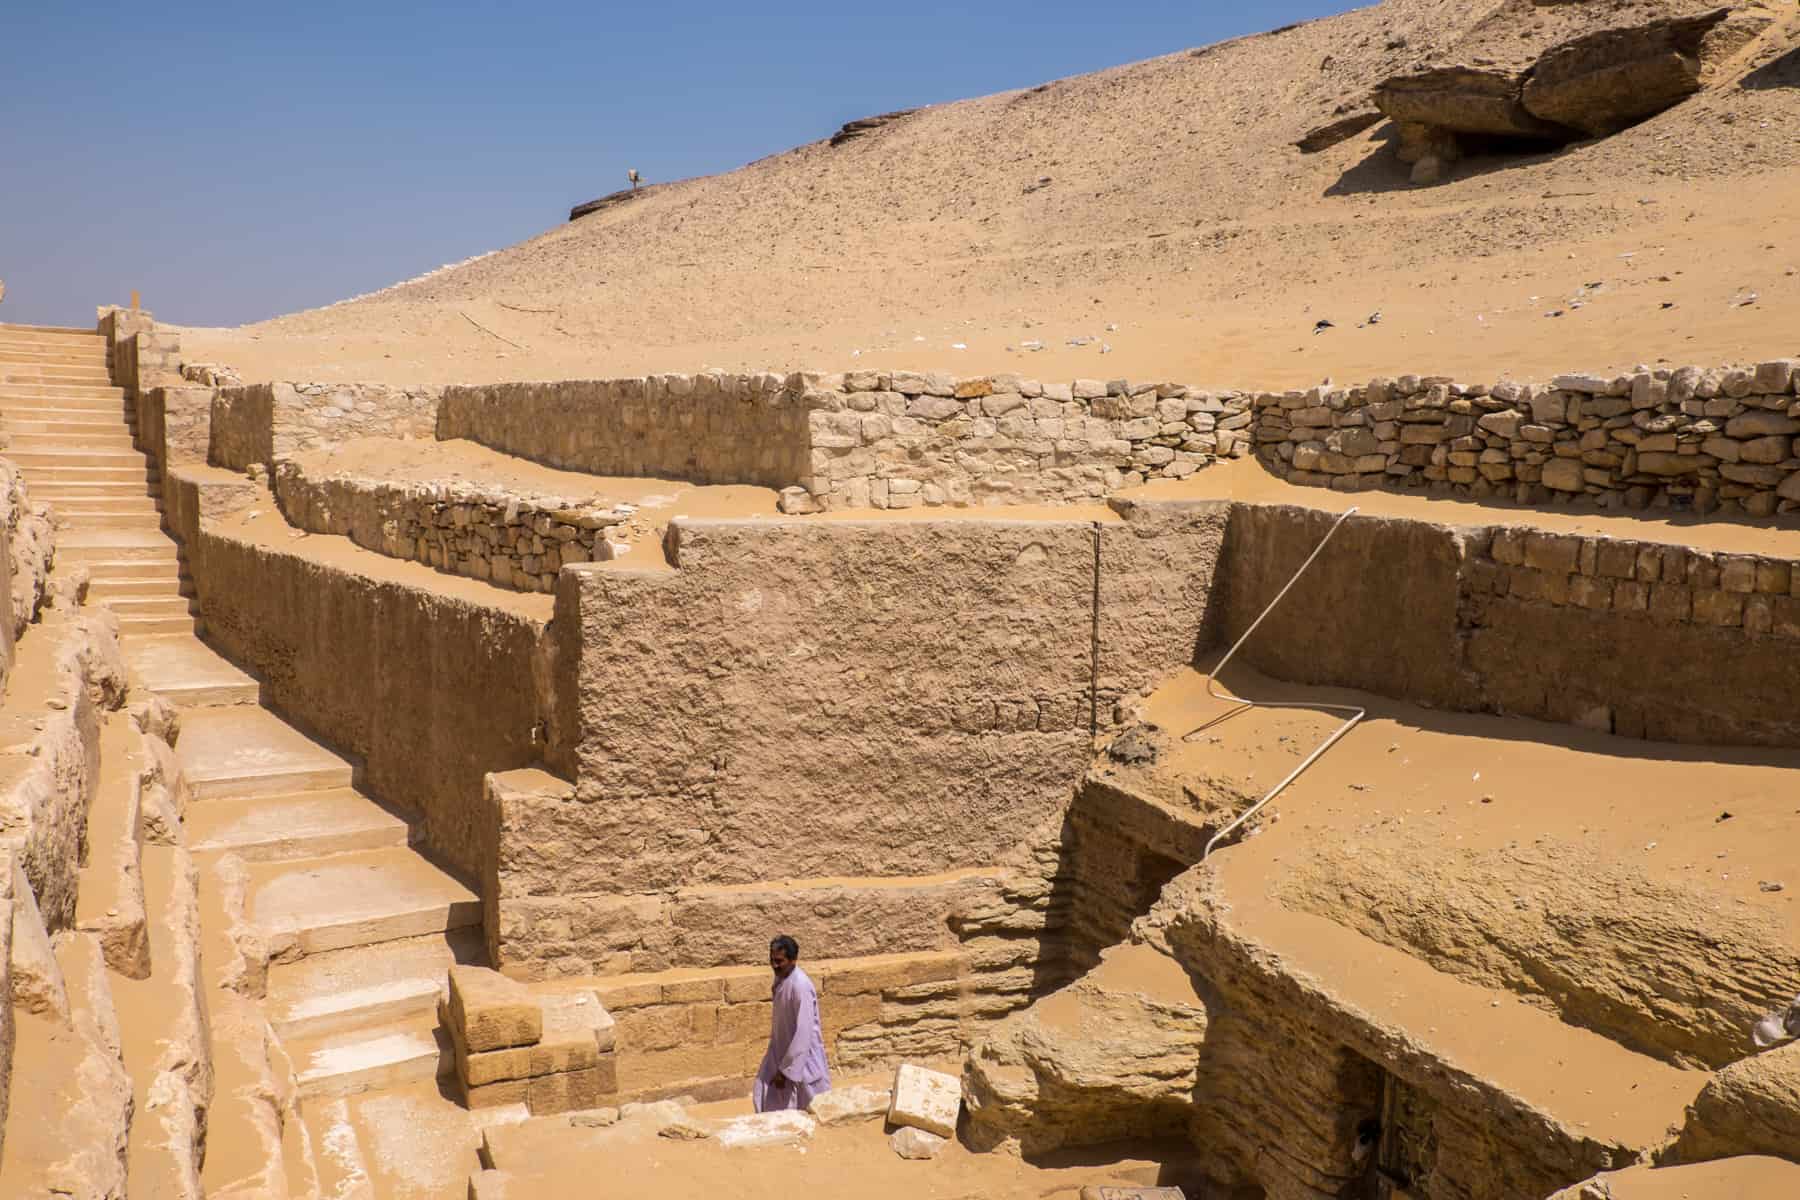 An Egyption guard in lilac robe exits the doorway of a sandy, tiered tomb complex in Saqqara, Egypt